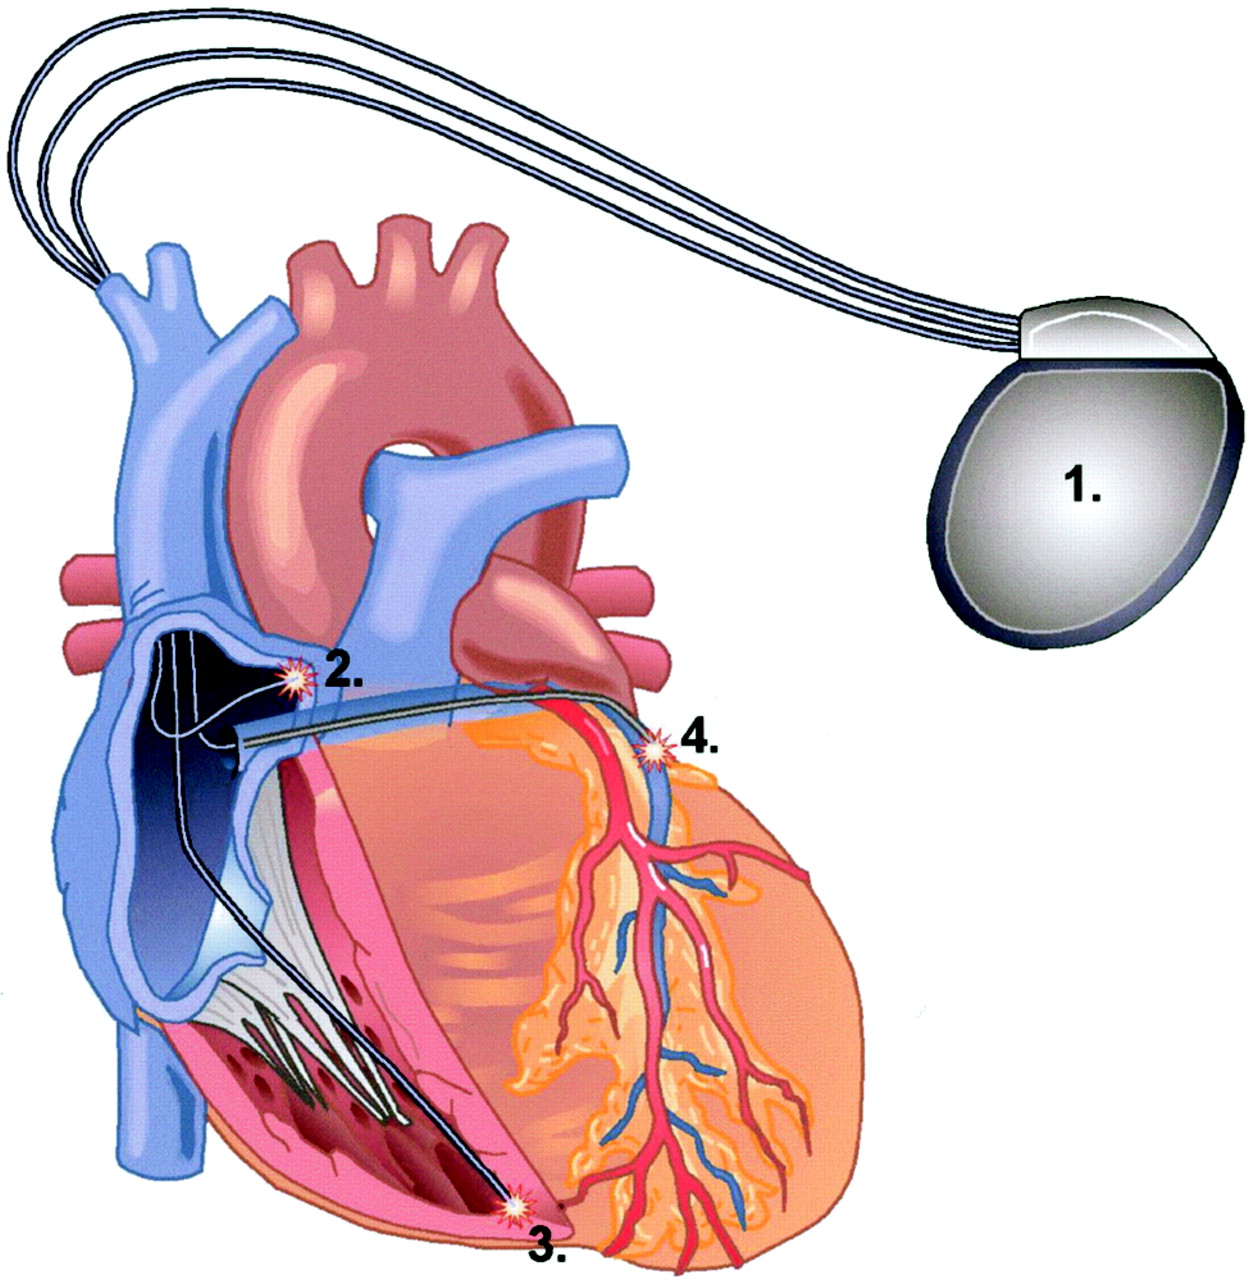 Cardiac pacemaker clipart 20 free Cliparts | Download ...